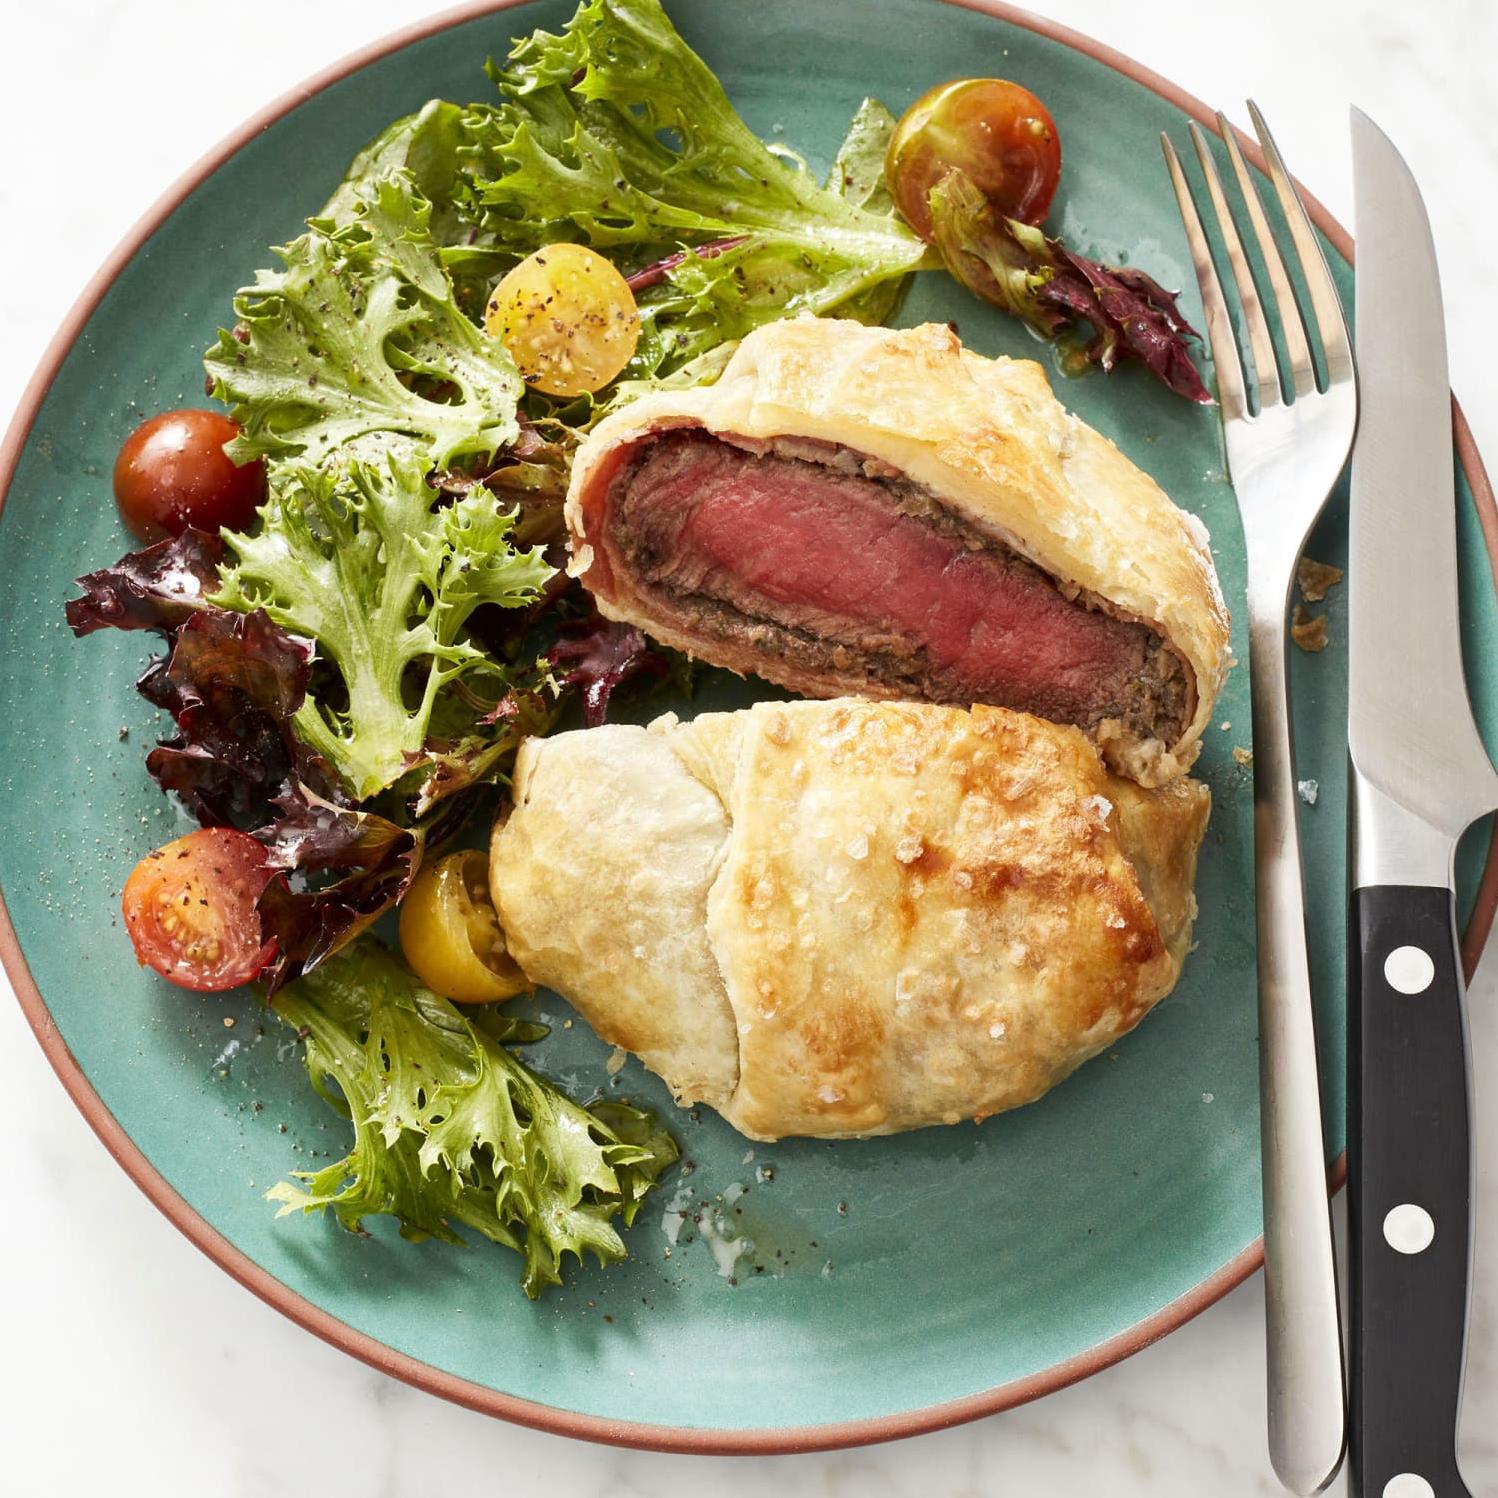  Bite into this juicy and flavorful beef Wellington